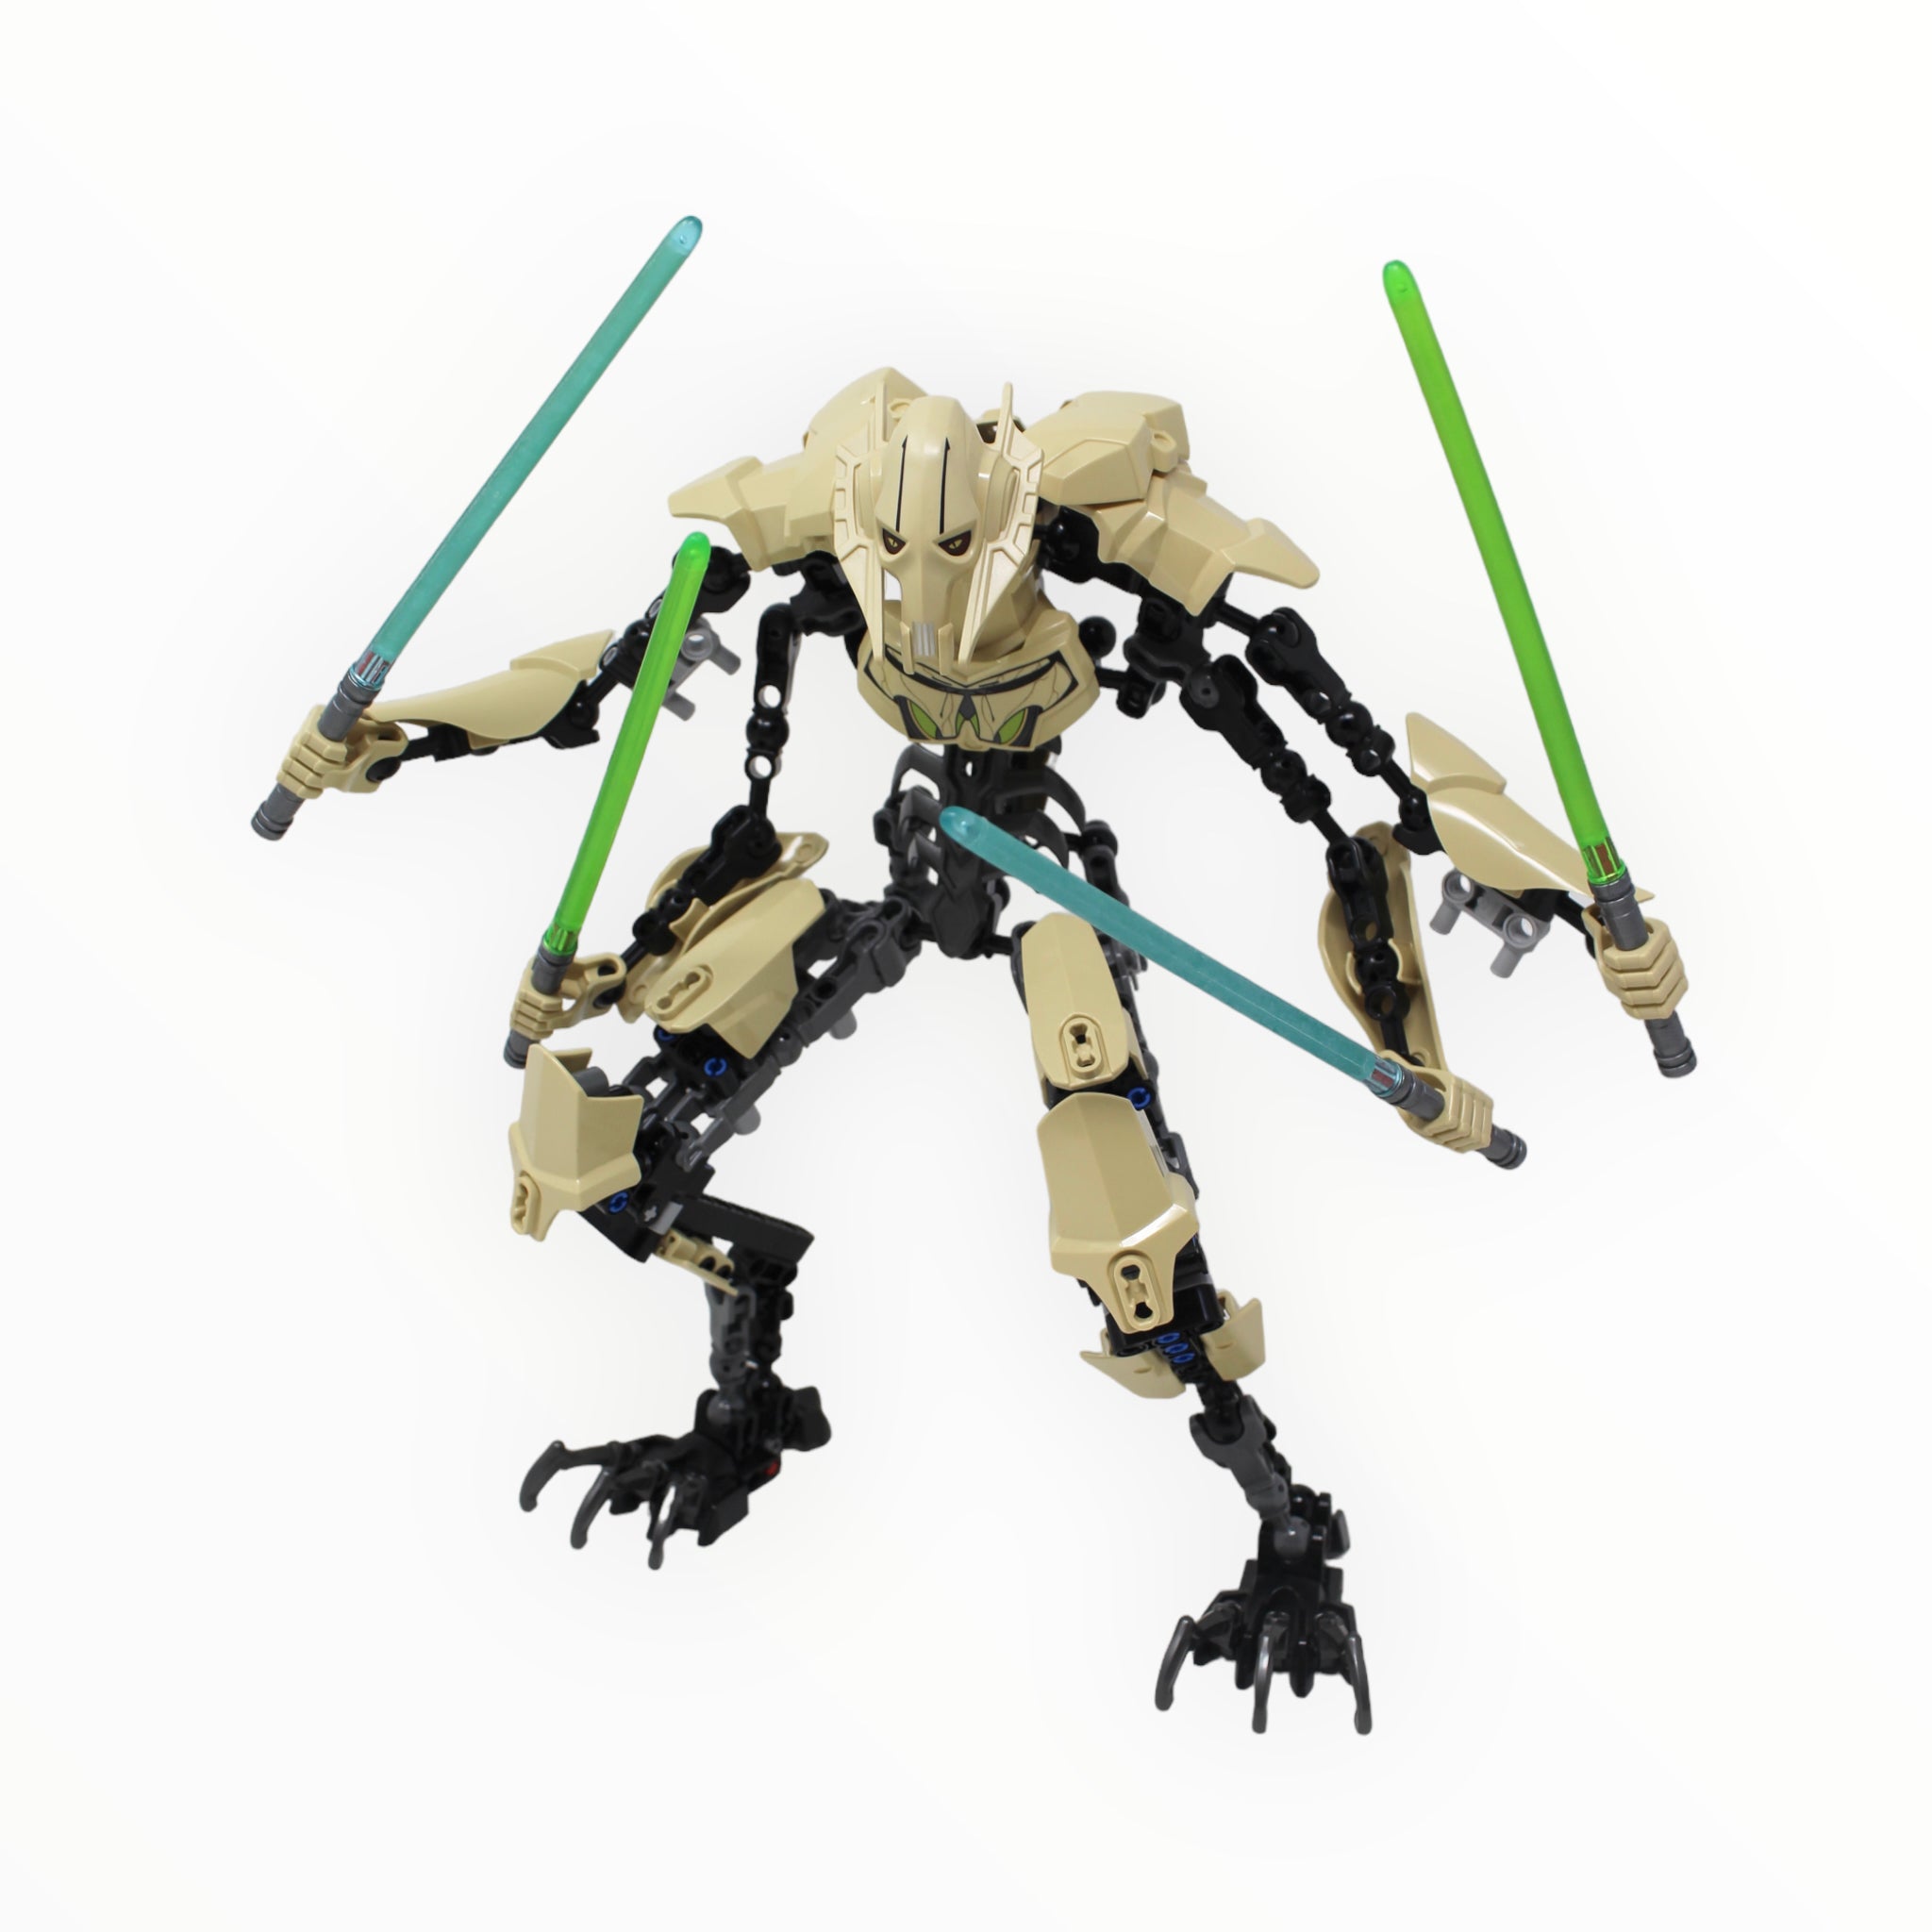 Used Set 75112 Star Wars Buildable Figures General Grievous